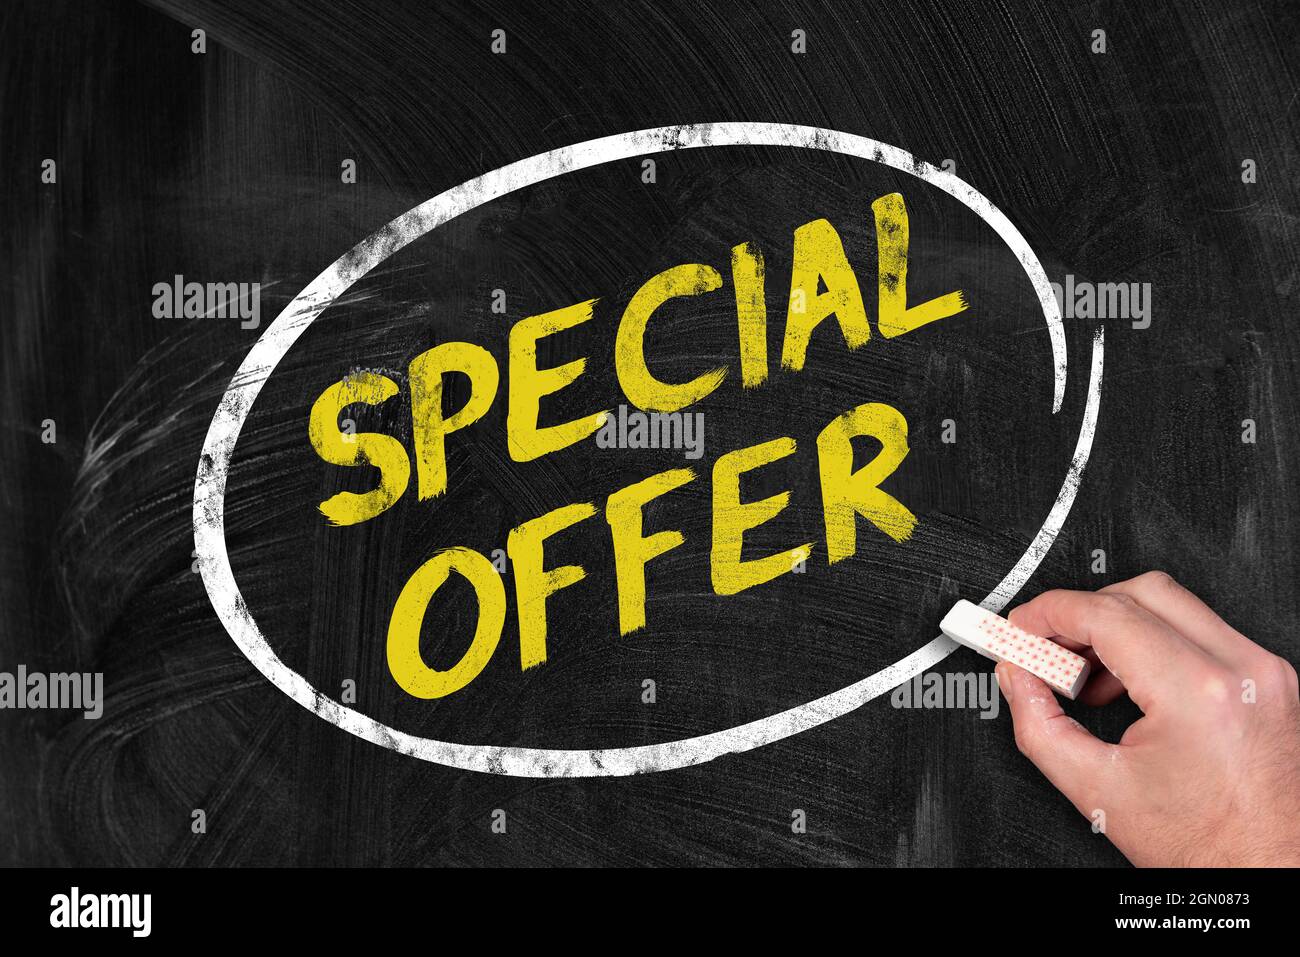 SPECIAL OFFER written on chalkboard, business concept Stock Photo